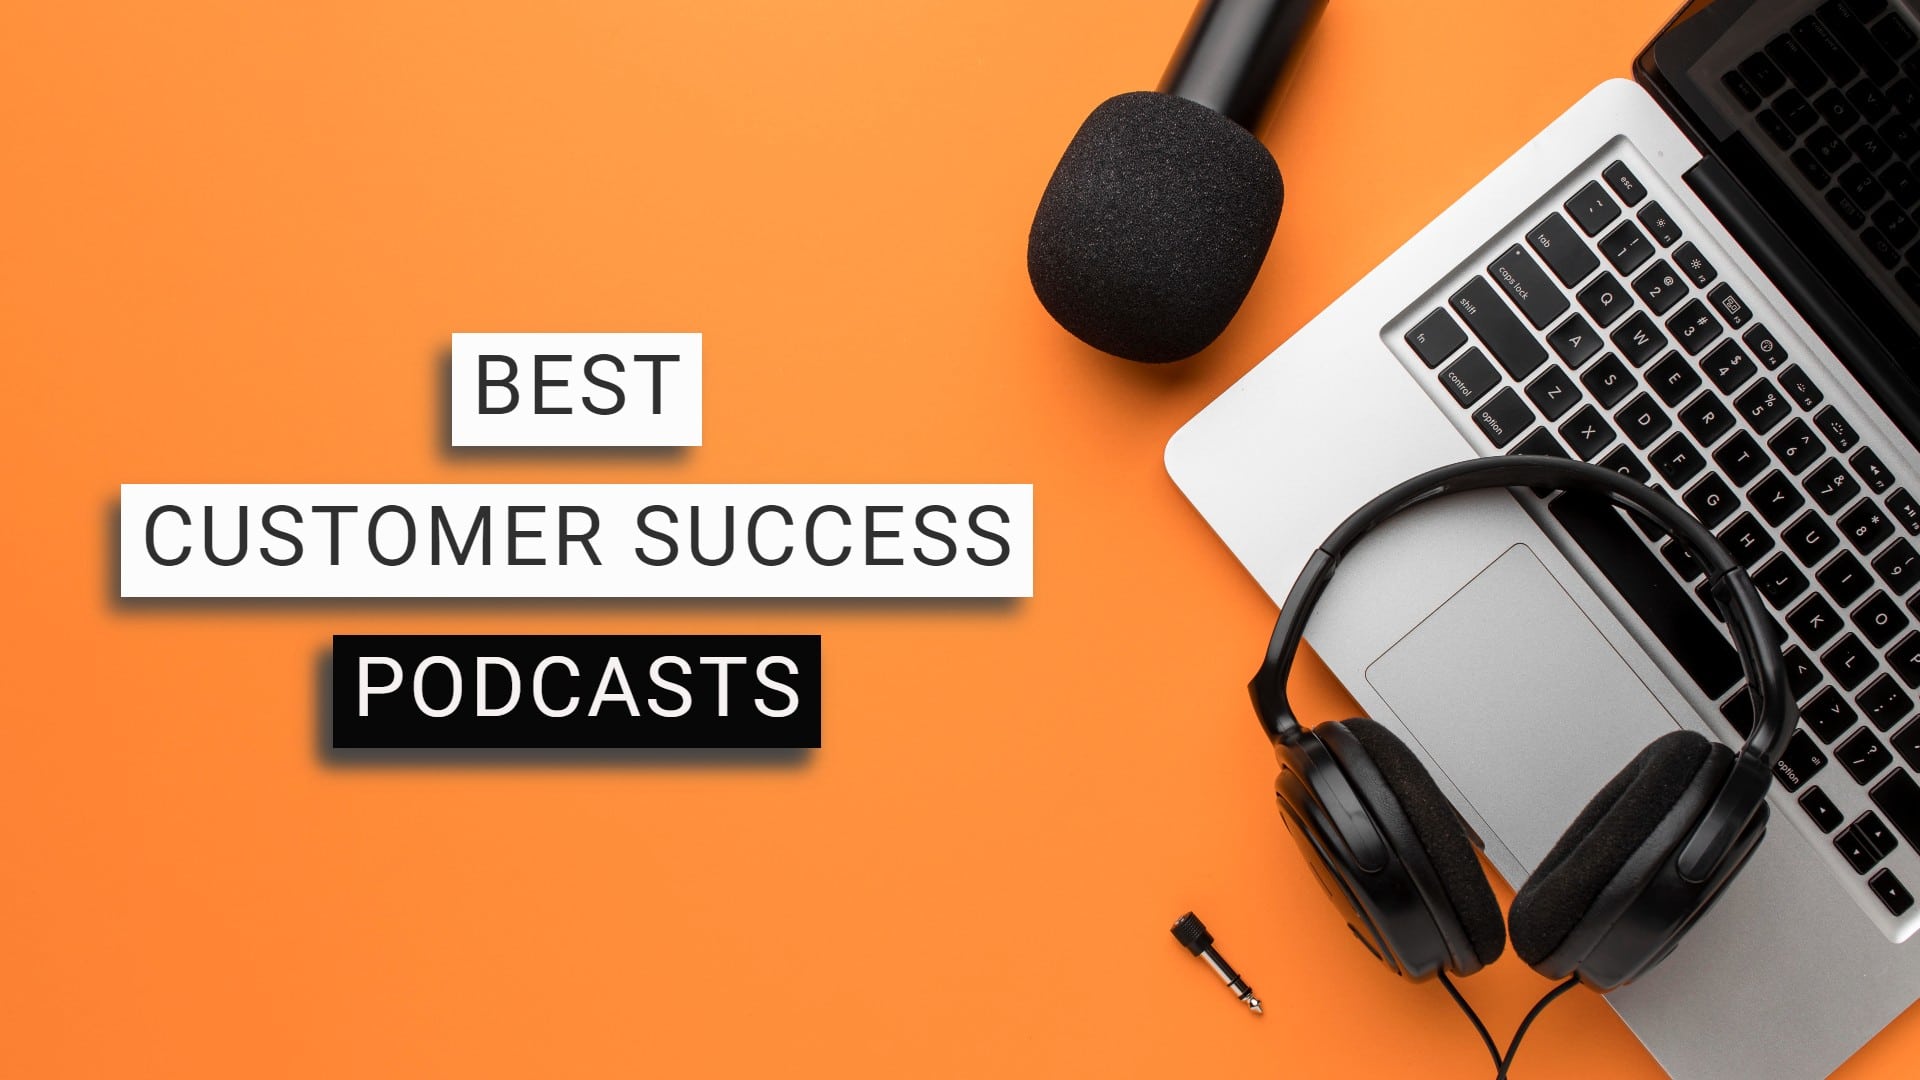 The 14 Best Customer Success Podcasts to Grow Your Career | 2022 List